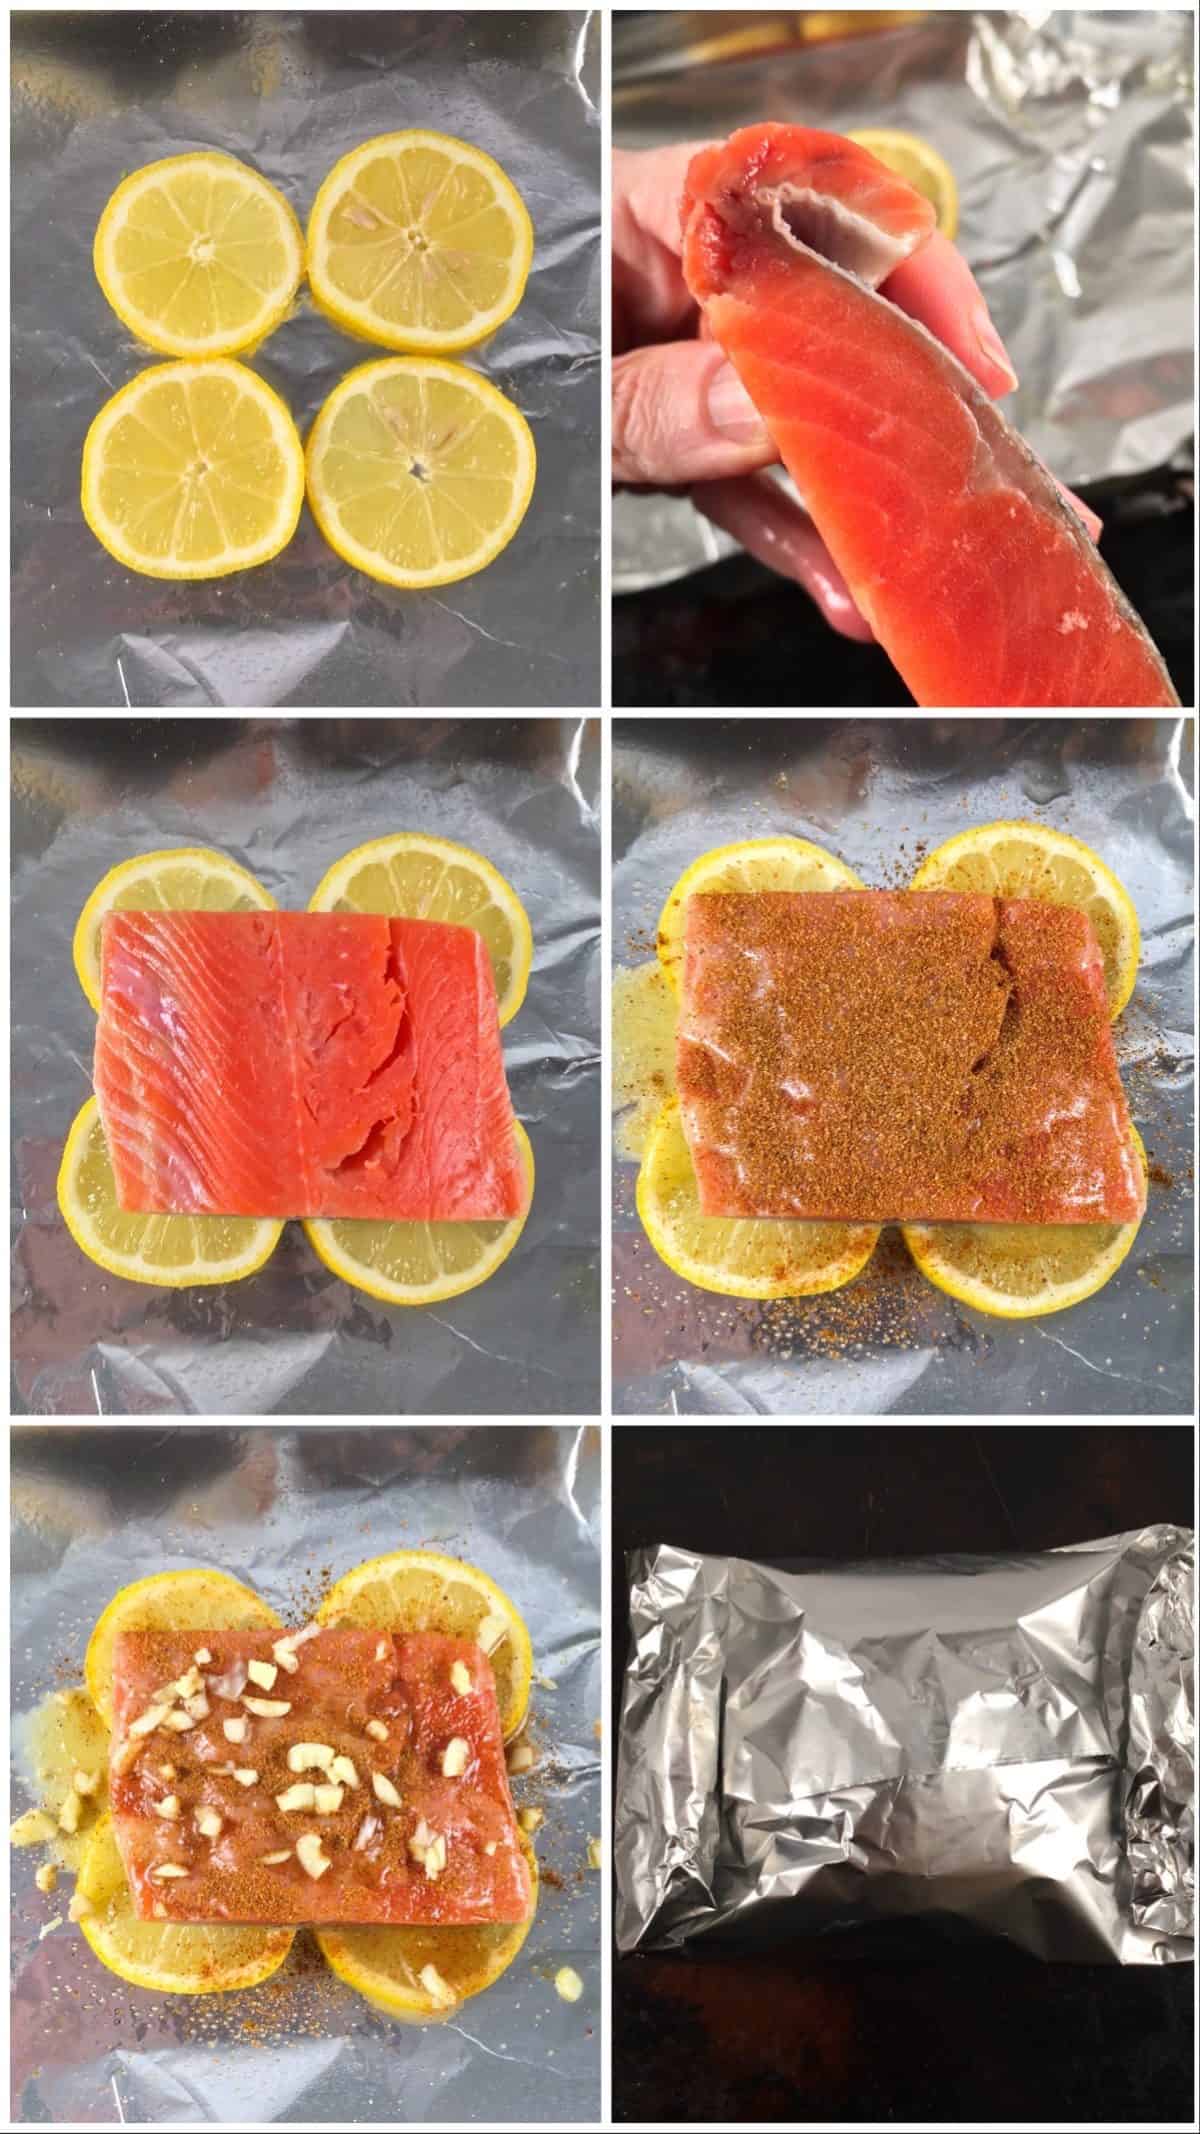 how long to bake salmon at 375